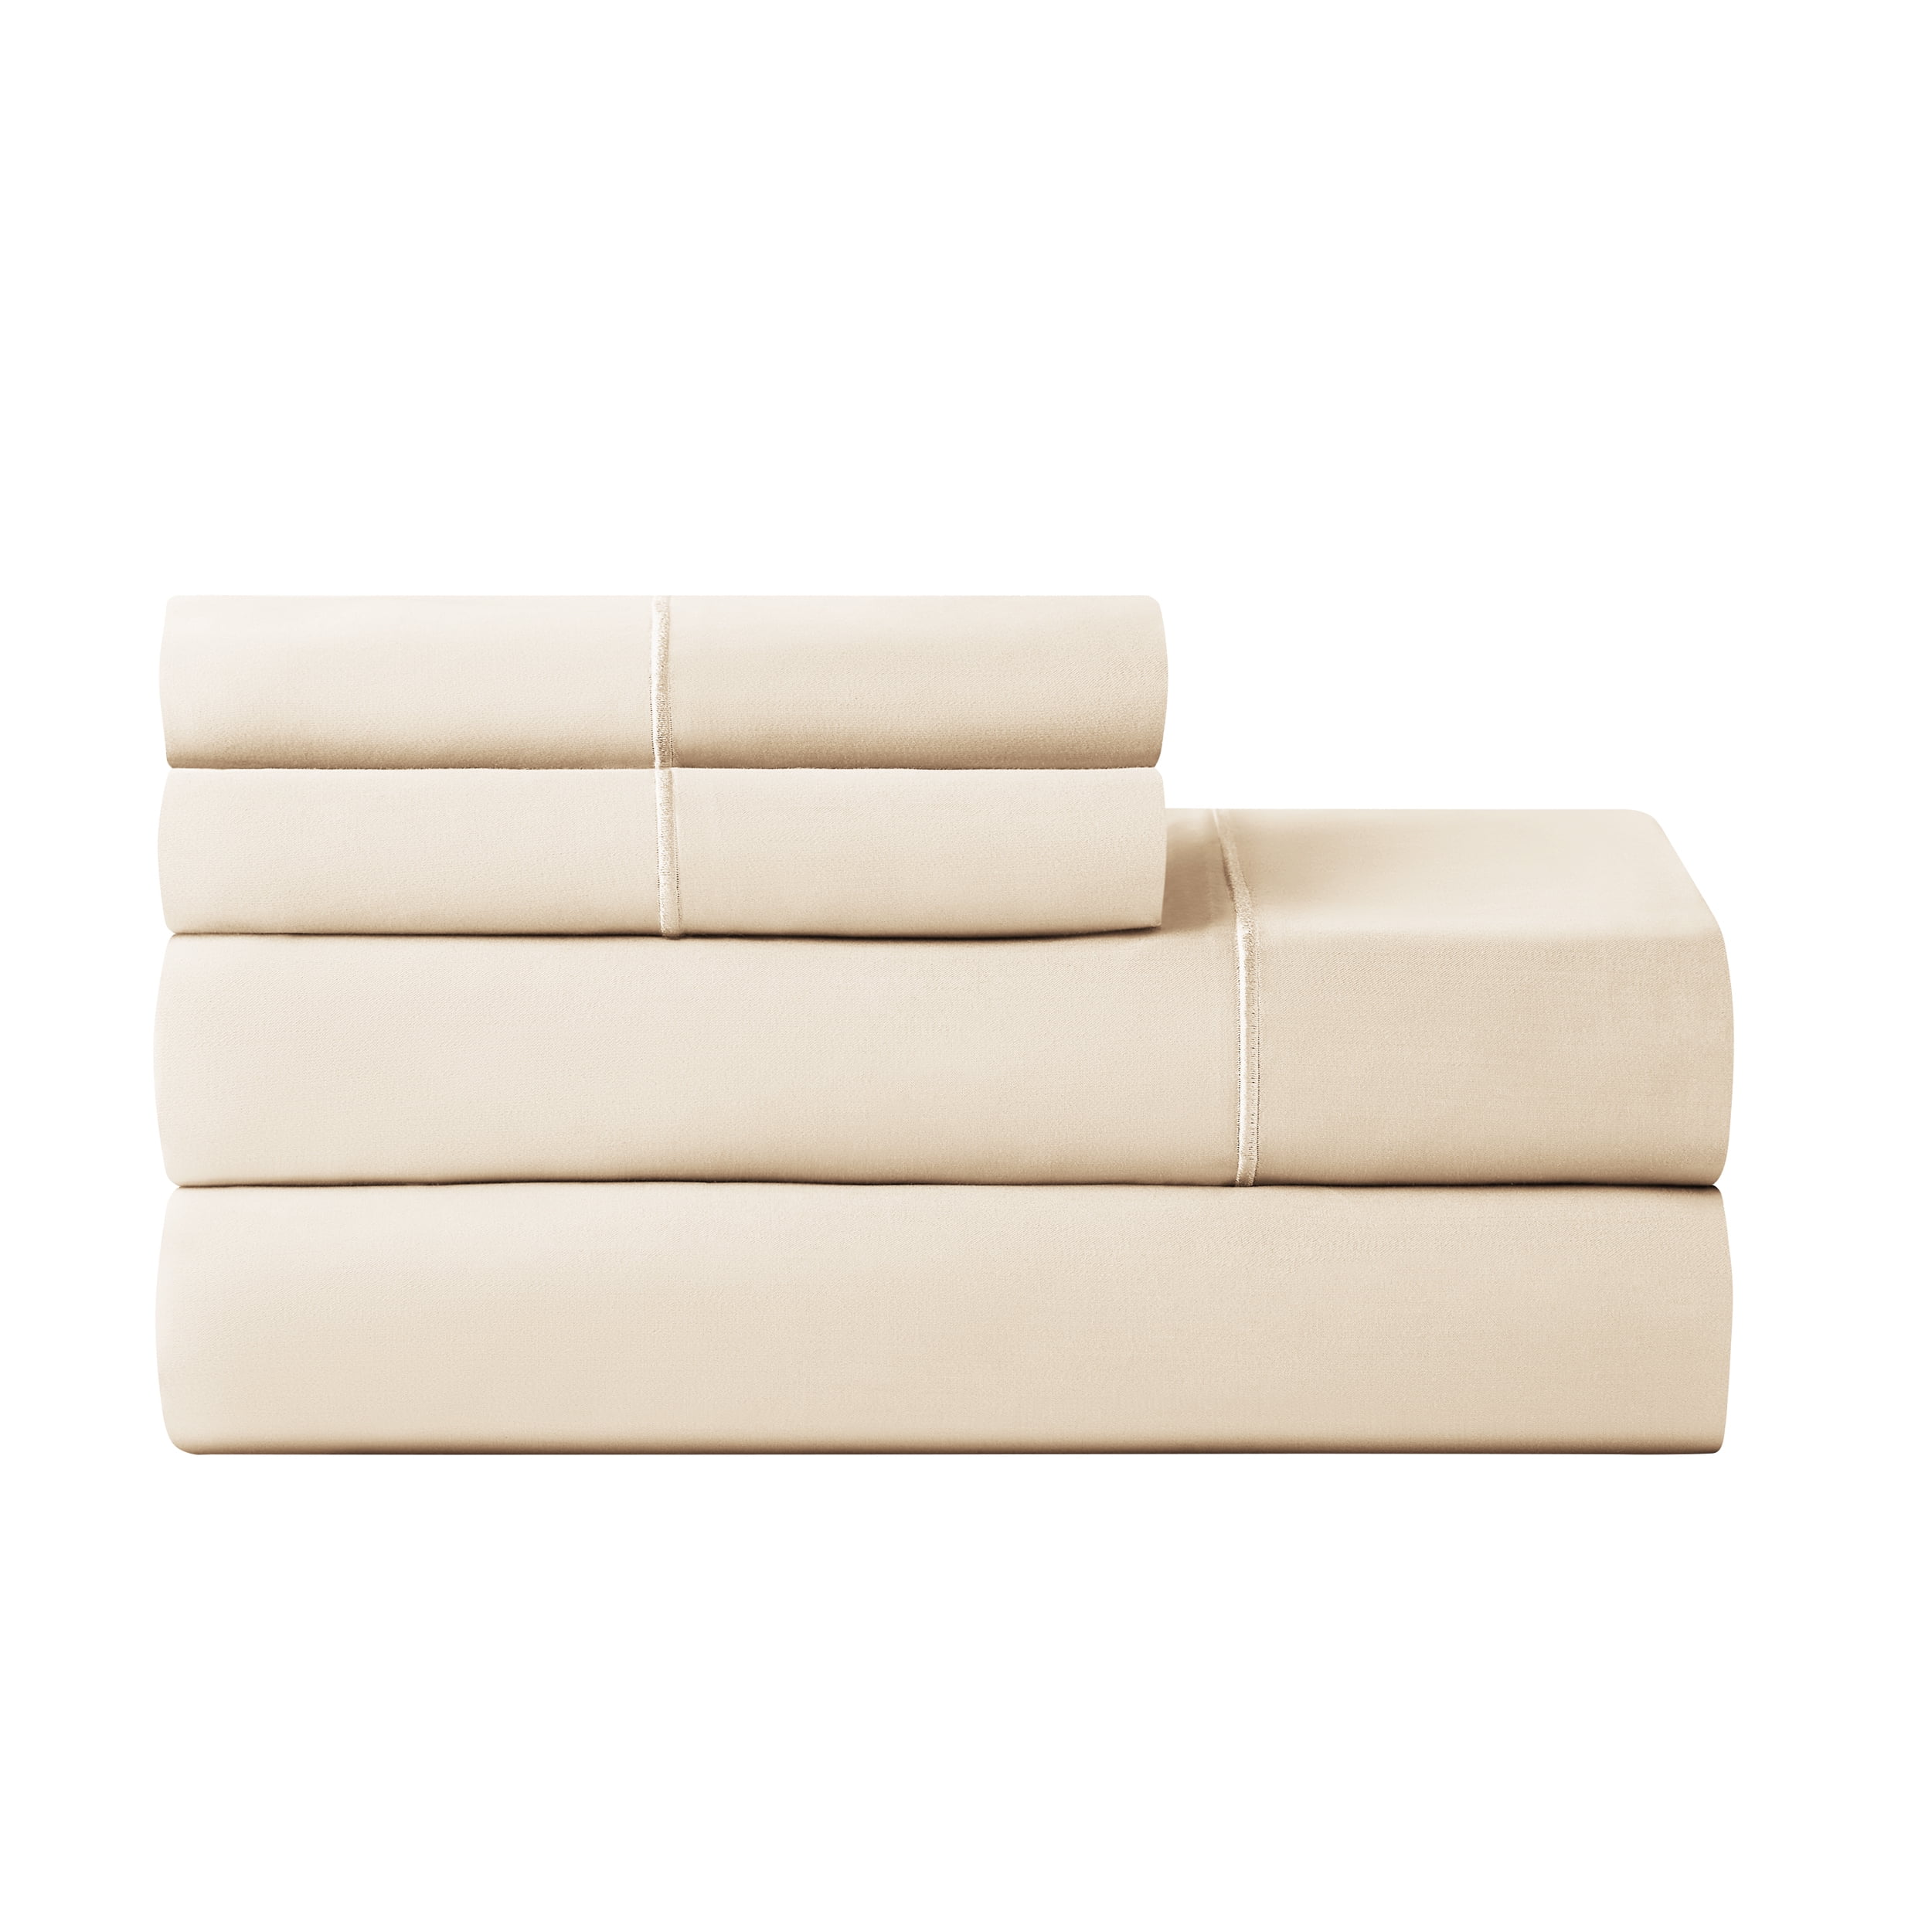 Hotel Style 4-Piece 600 Thread Count Grey Egyptian Cotton Bed